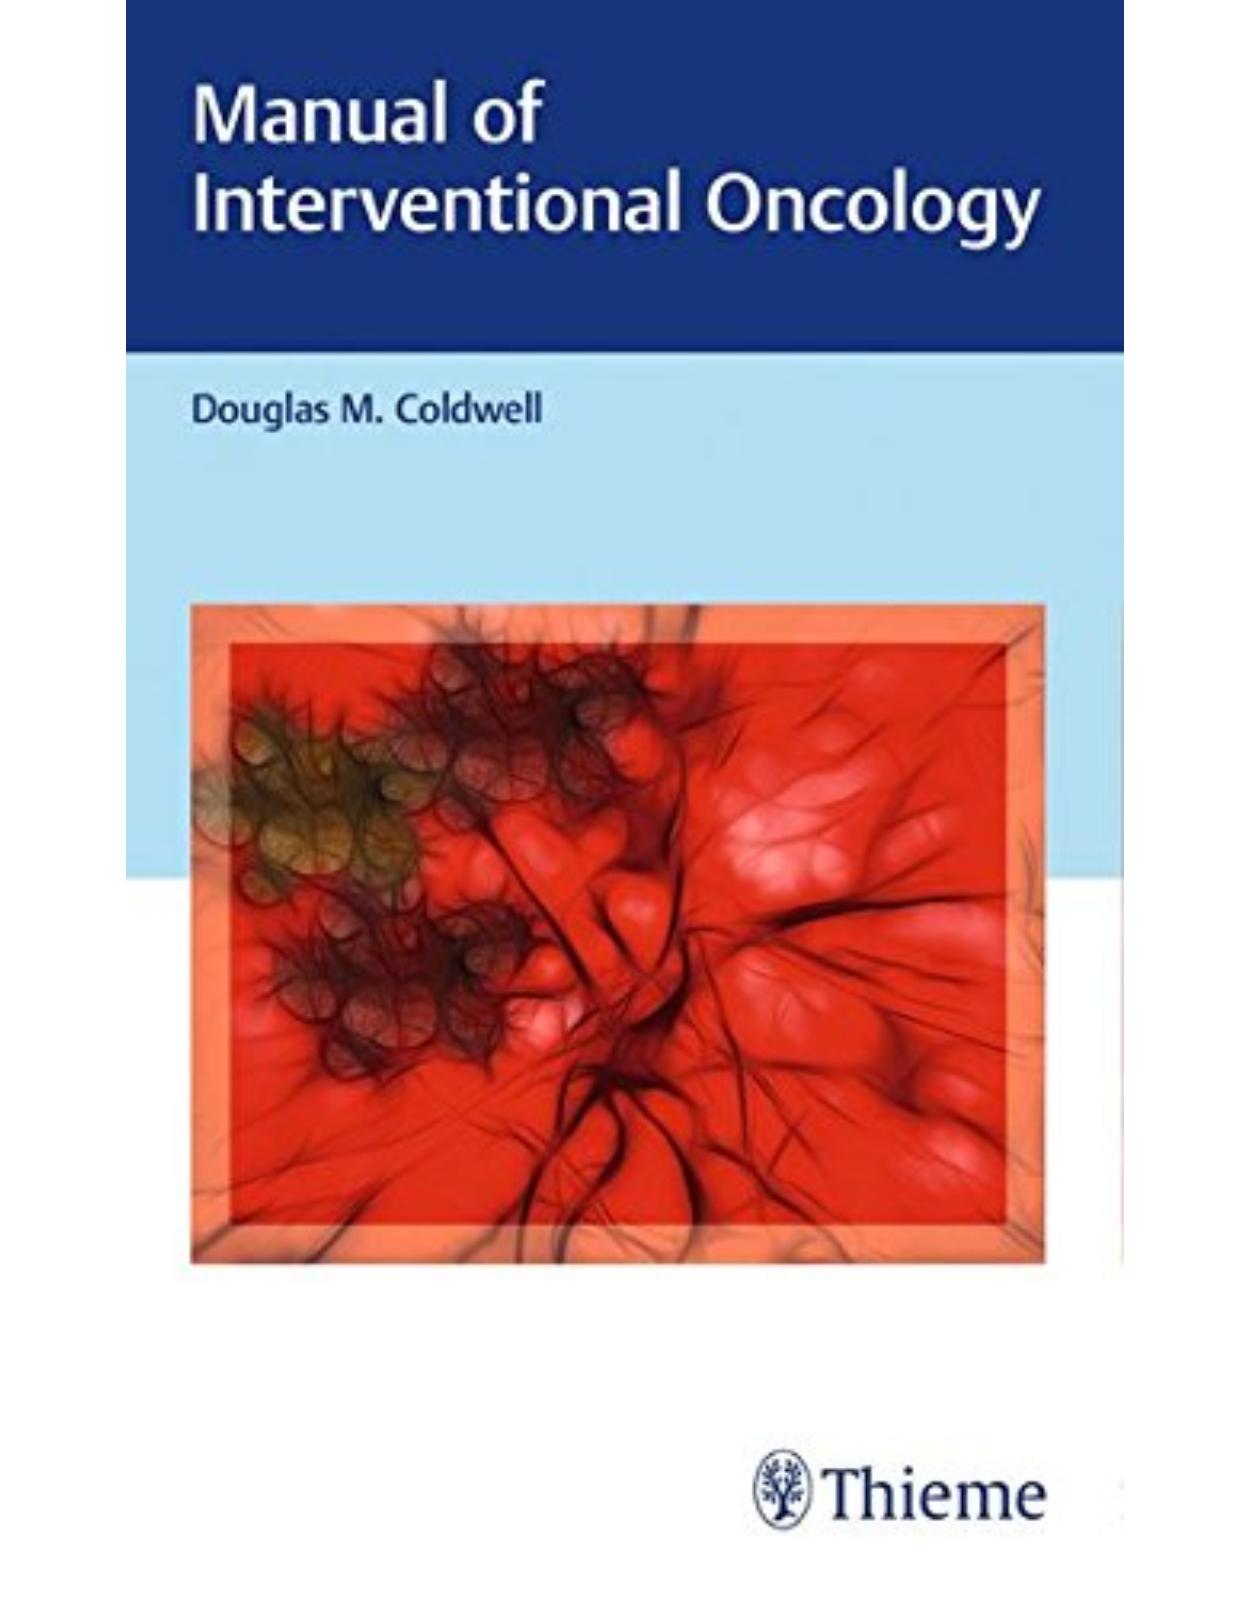  Manual of Interventional Oncology